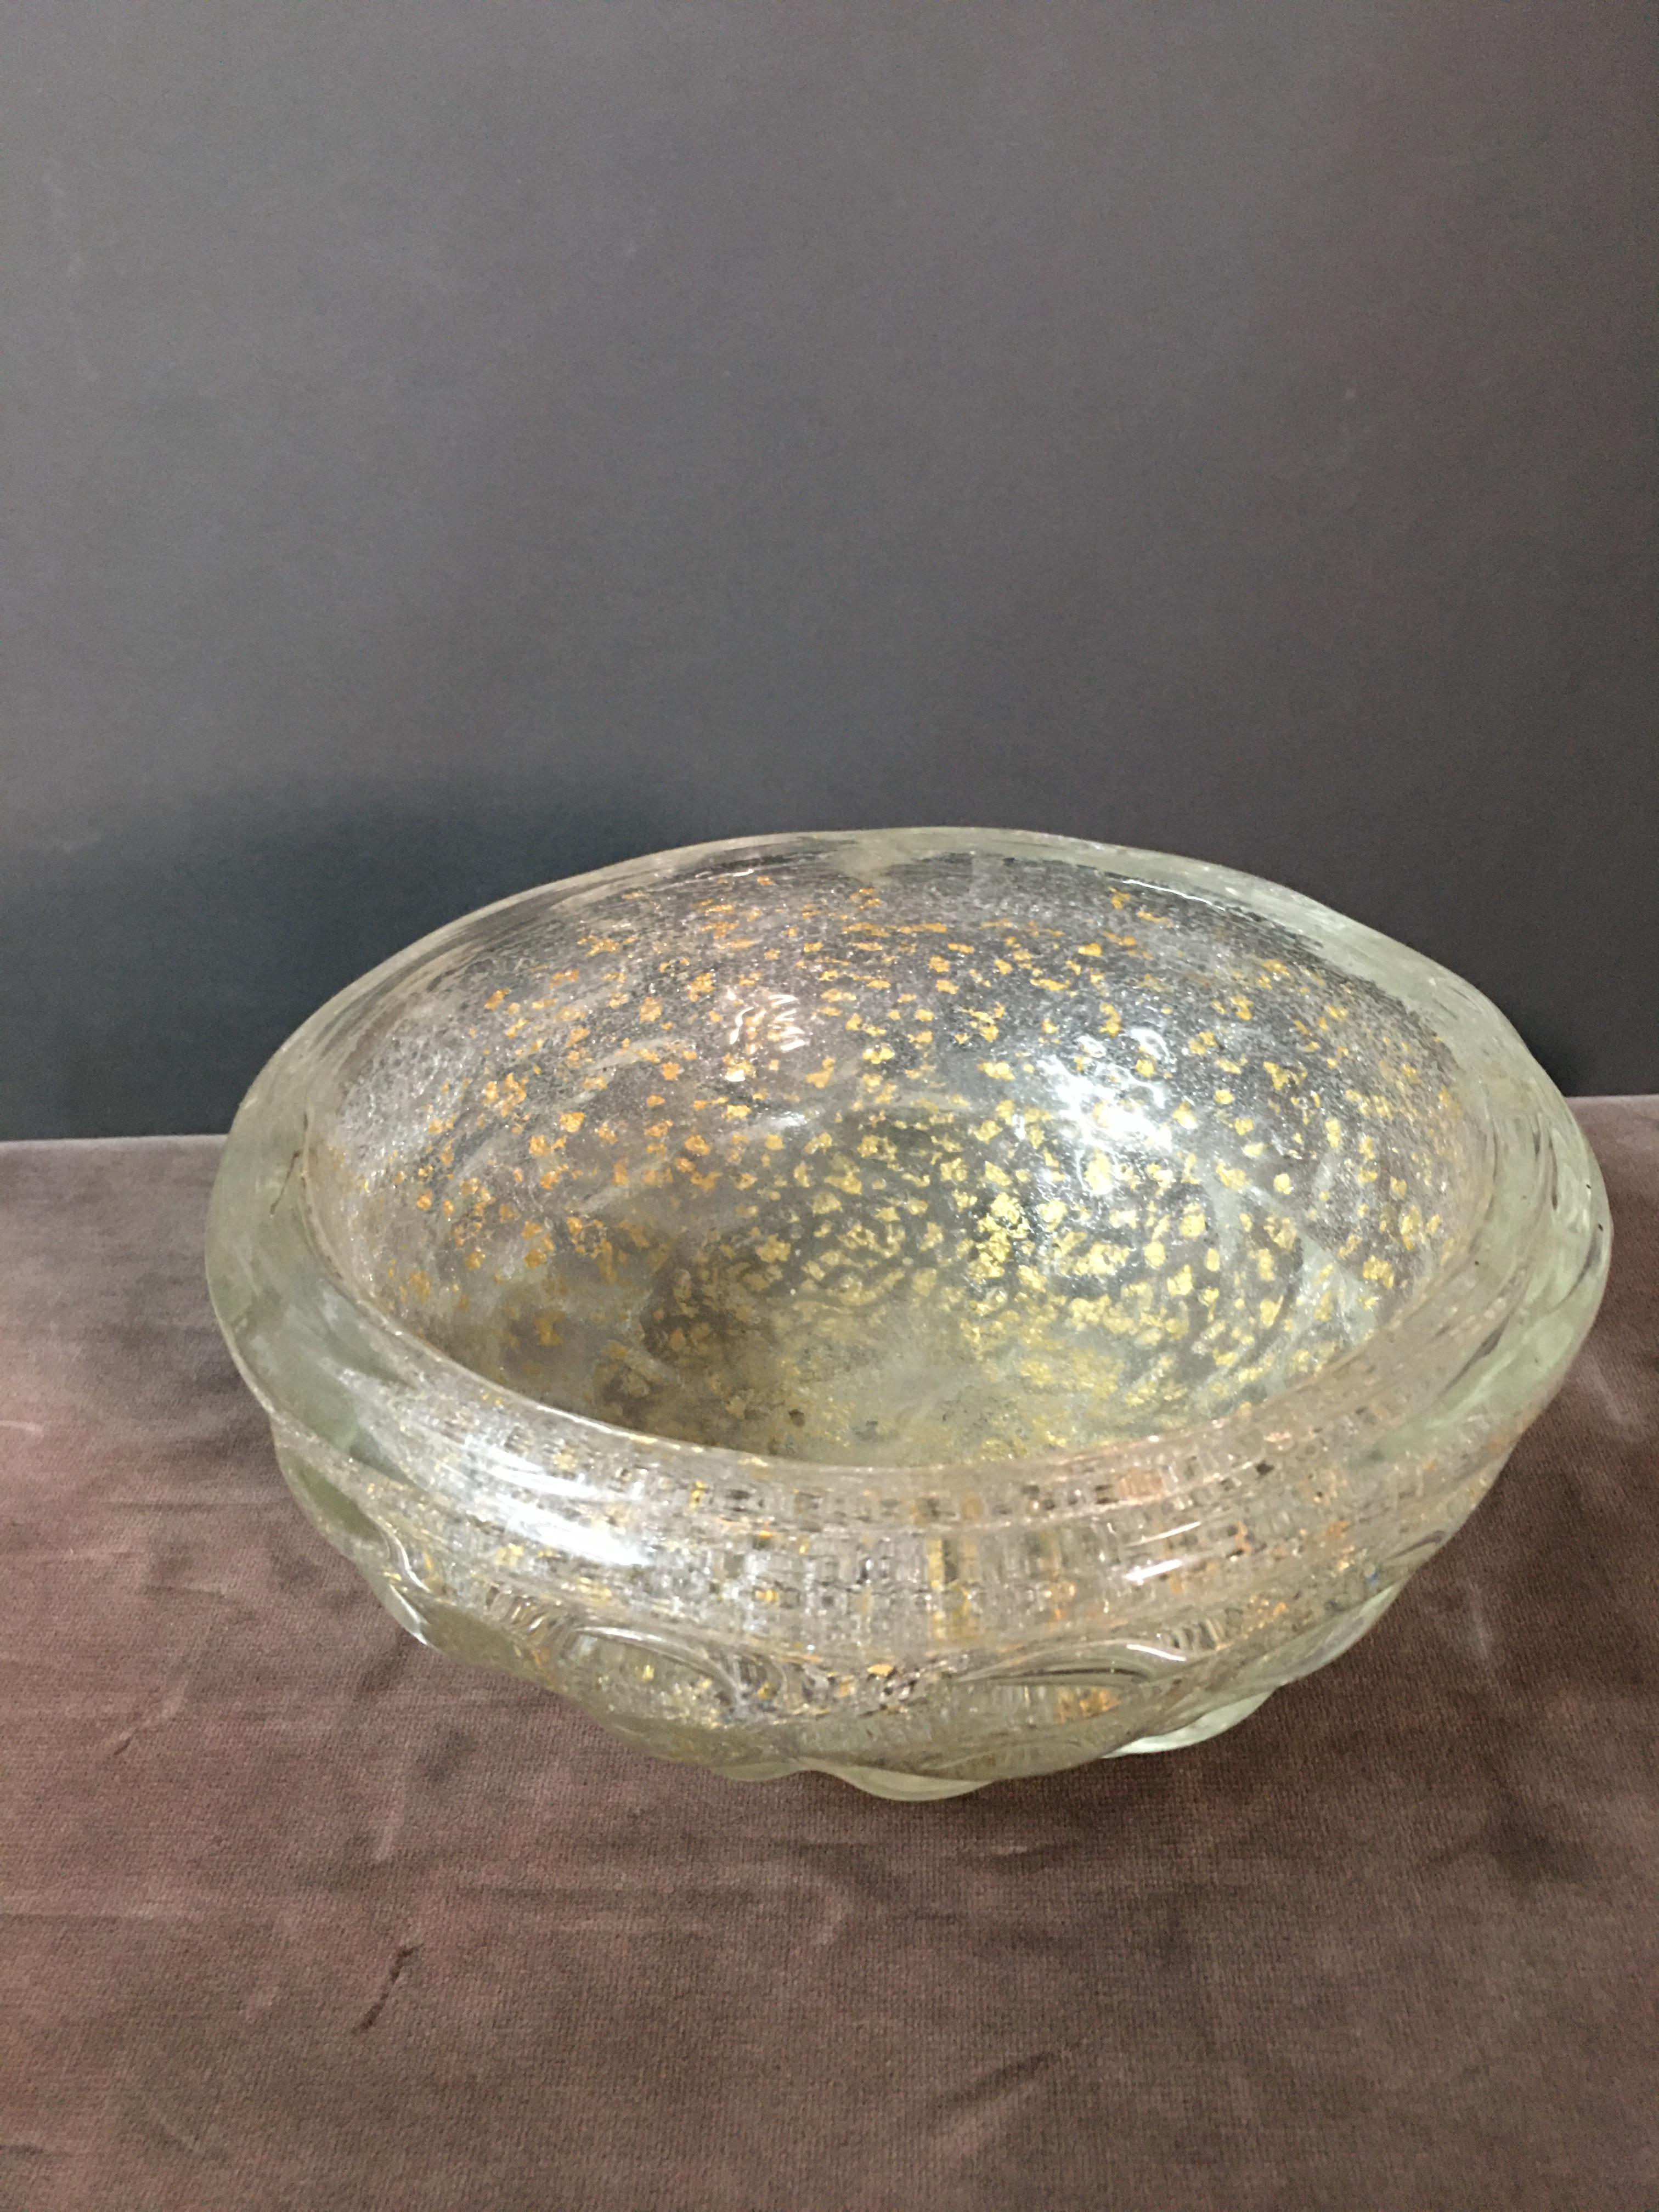 Beautiful glass vase attributed to the Murano master Archimede Seguso 

Every item of our Gallery, upon request, is accompanied by a certificate of authenticity issued by Sabrina Egidi official Expert in Italian furniture for the Chamber of